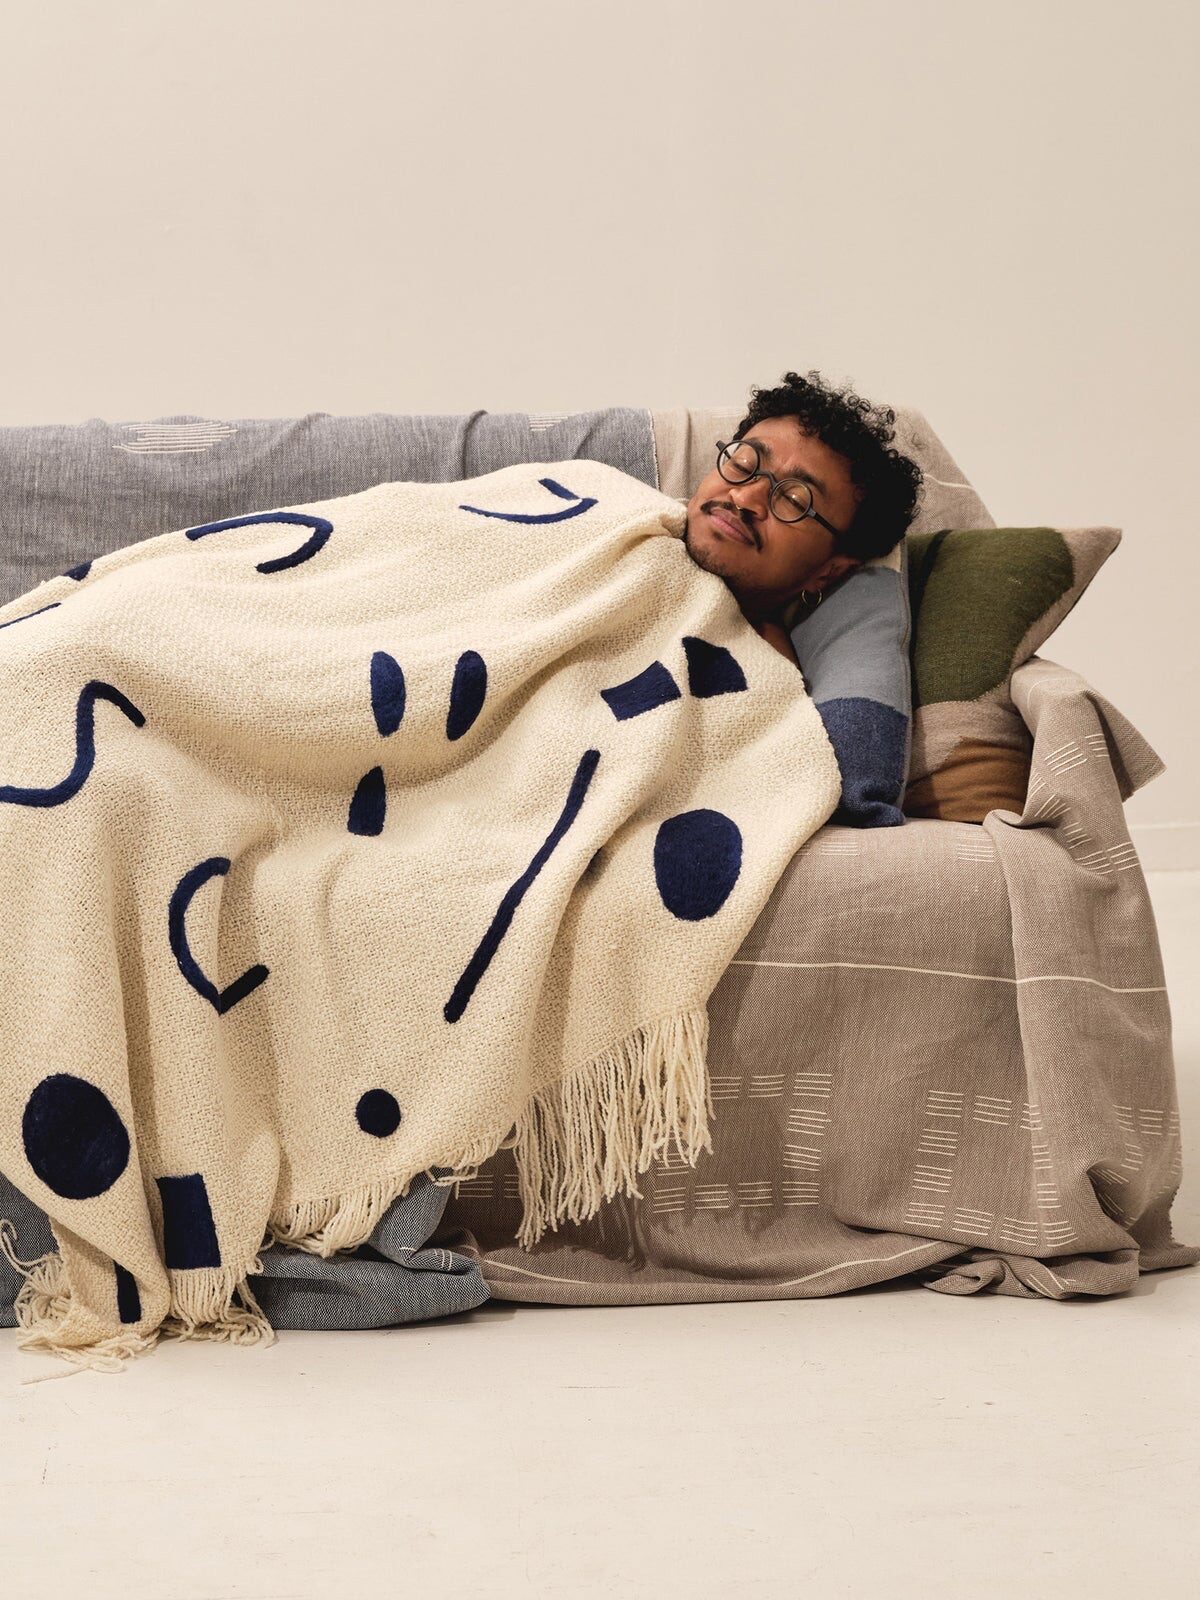 A person sleeps on a couch covered with blankets. They are wrapped in a beige blanket with abstract blue patterns.